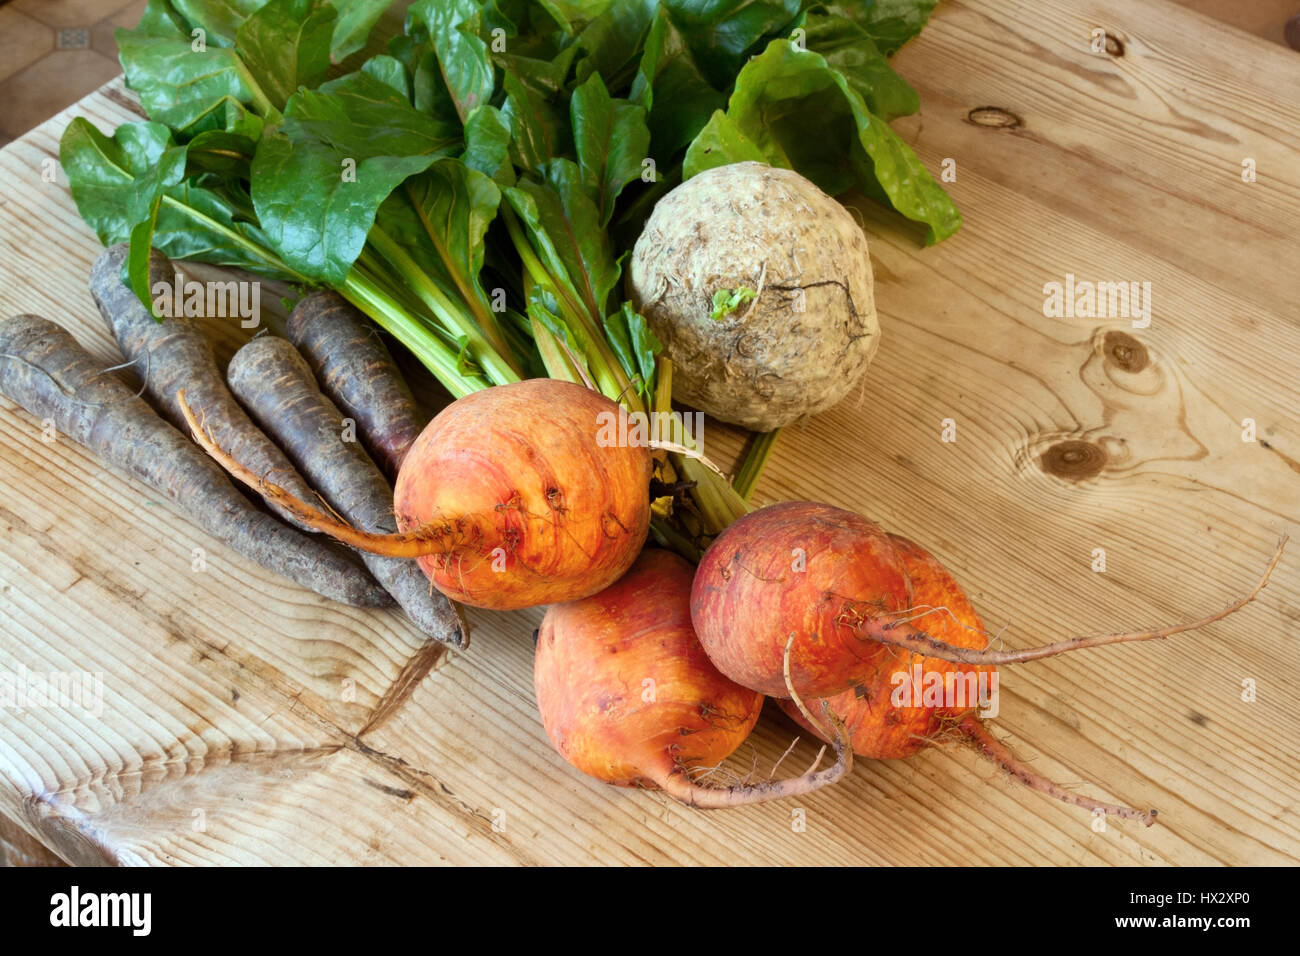 Unusual vegetables including golden beetroot and purple carrots Stock Photo